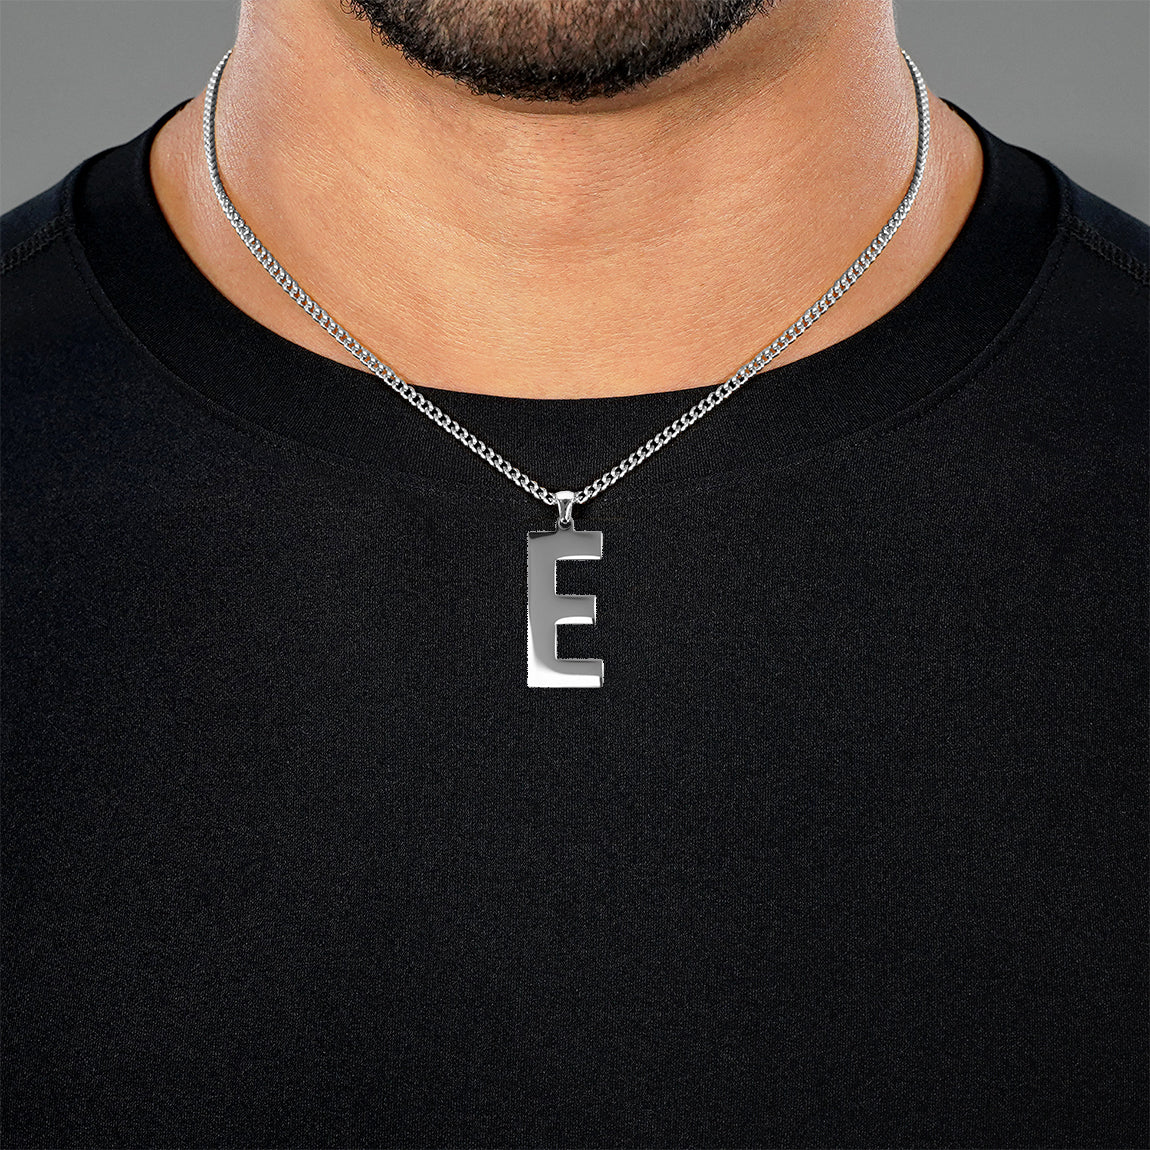 E Letter Pendant with Chain Necklace - Stainless Steel